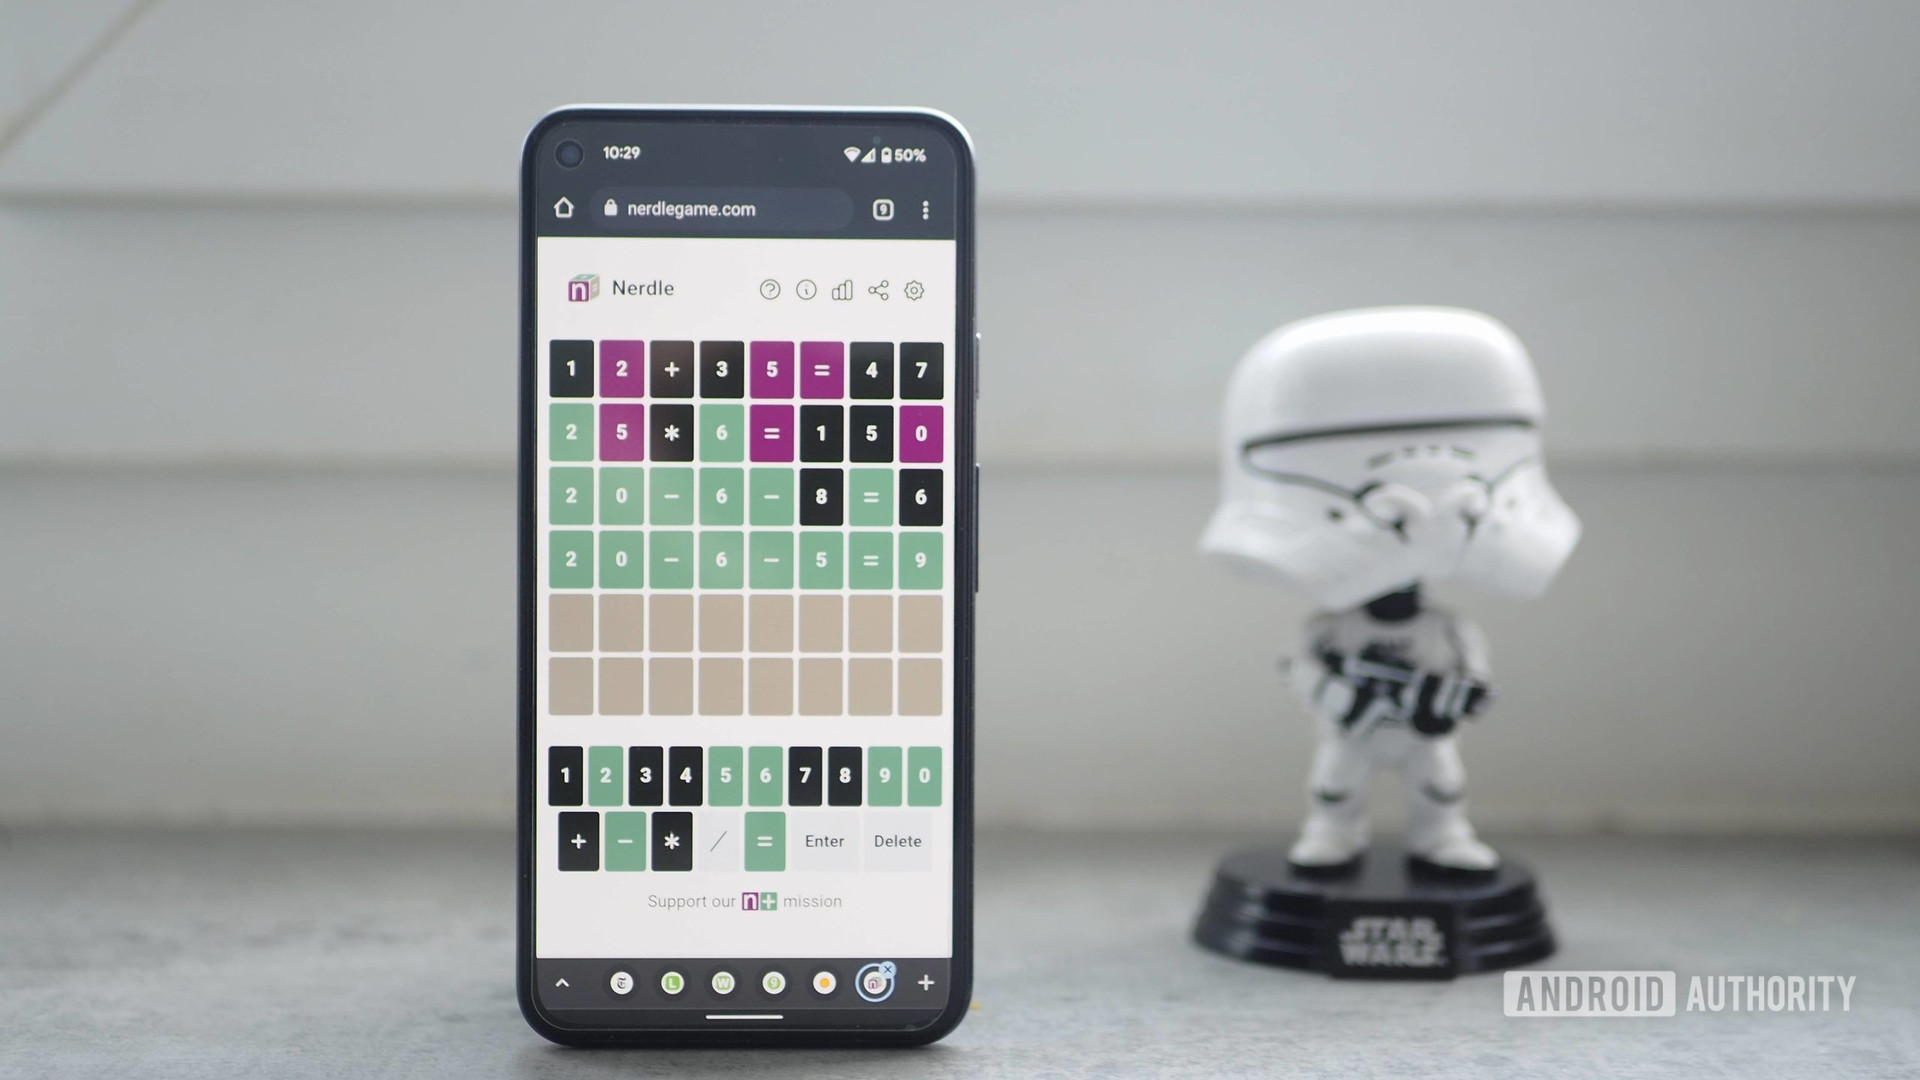 Pixel 5 showing Nerdlegame, a Wordle alternative, with a Star Wars figurine in the background